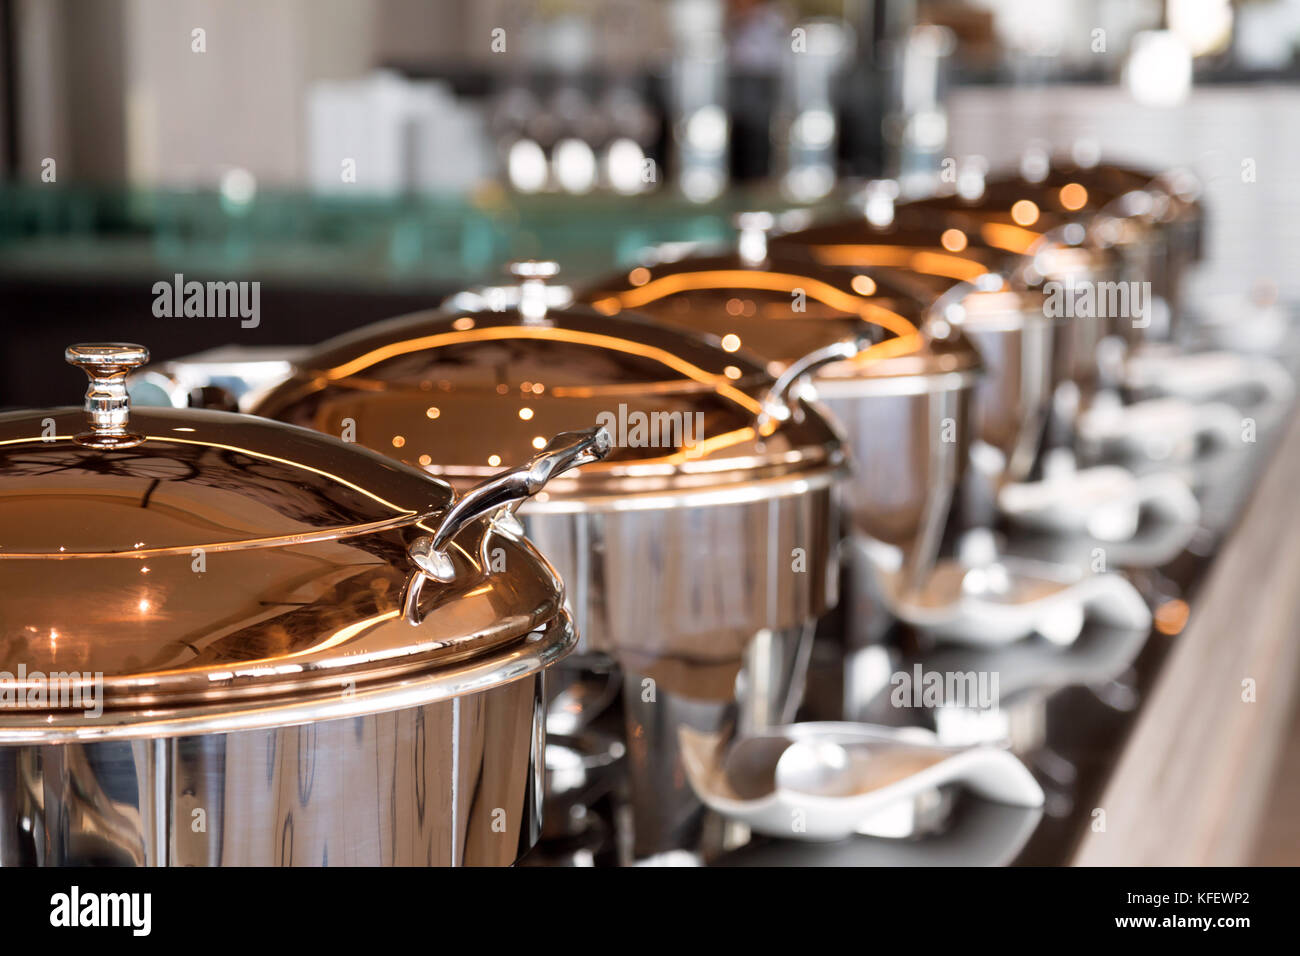 https://c8.alamy.com/comp/KFEWP2/heating-trays-on-the-buffet-line-ready-for-service-breakfast-and-lunch-KFEWP2.jpg